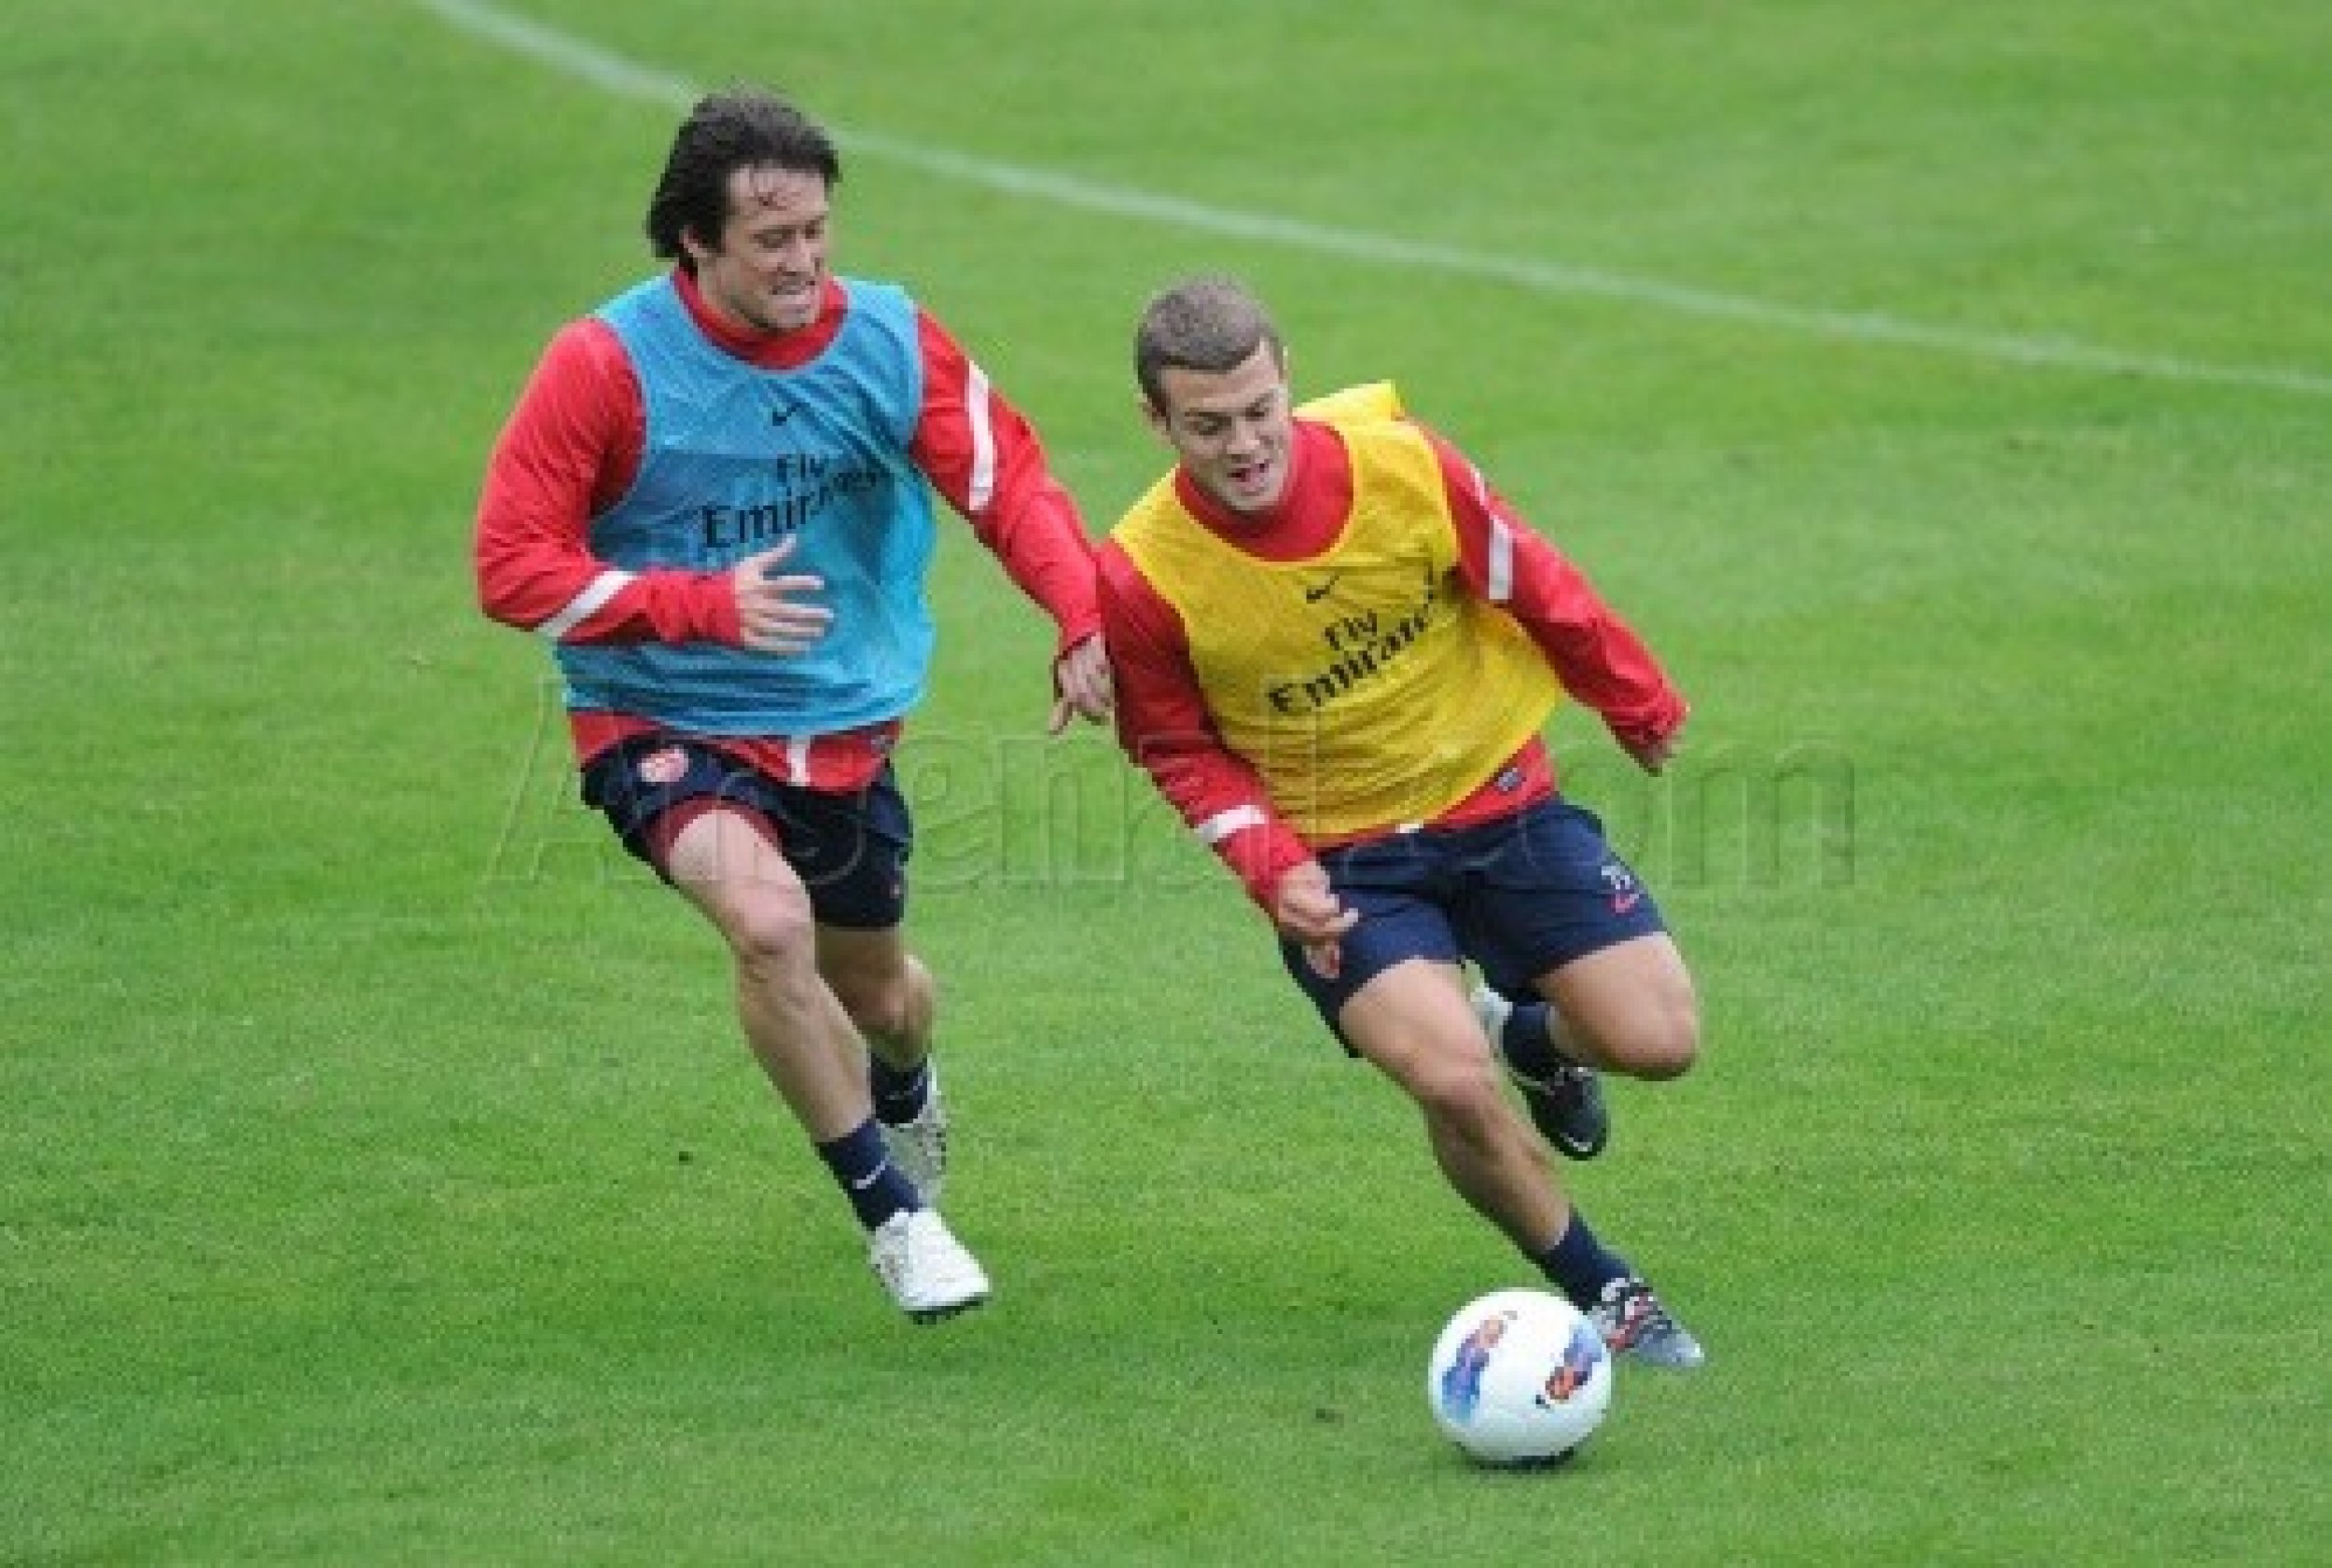 Team mates Tom Rosick and Jack Wilshere battles it out at training.